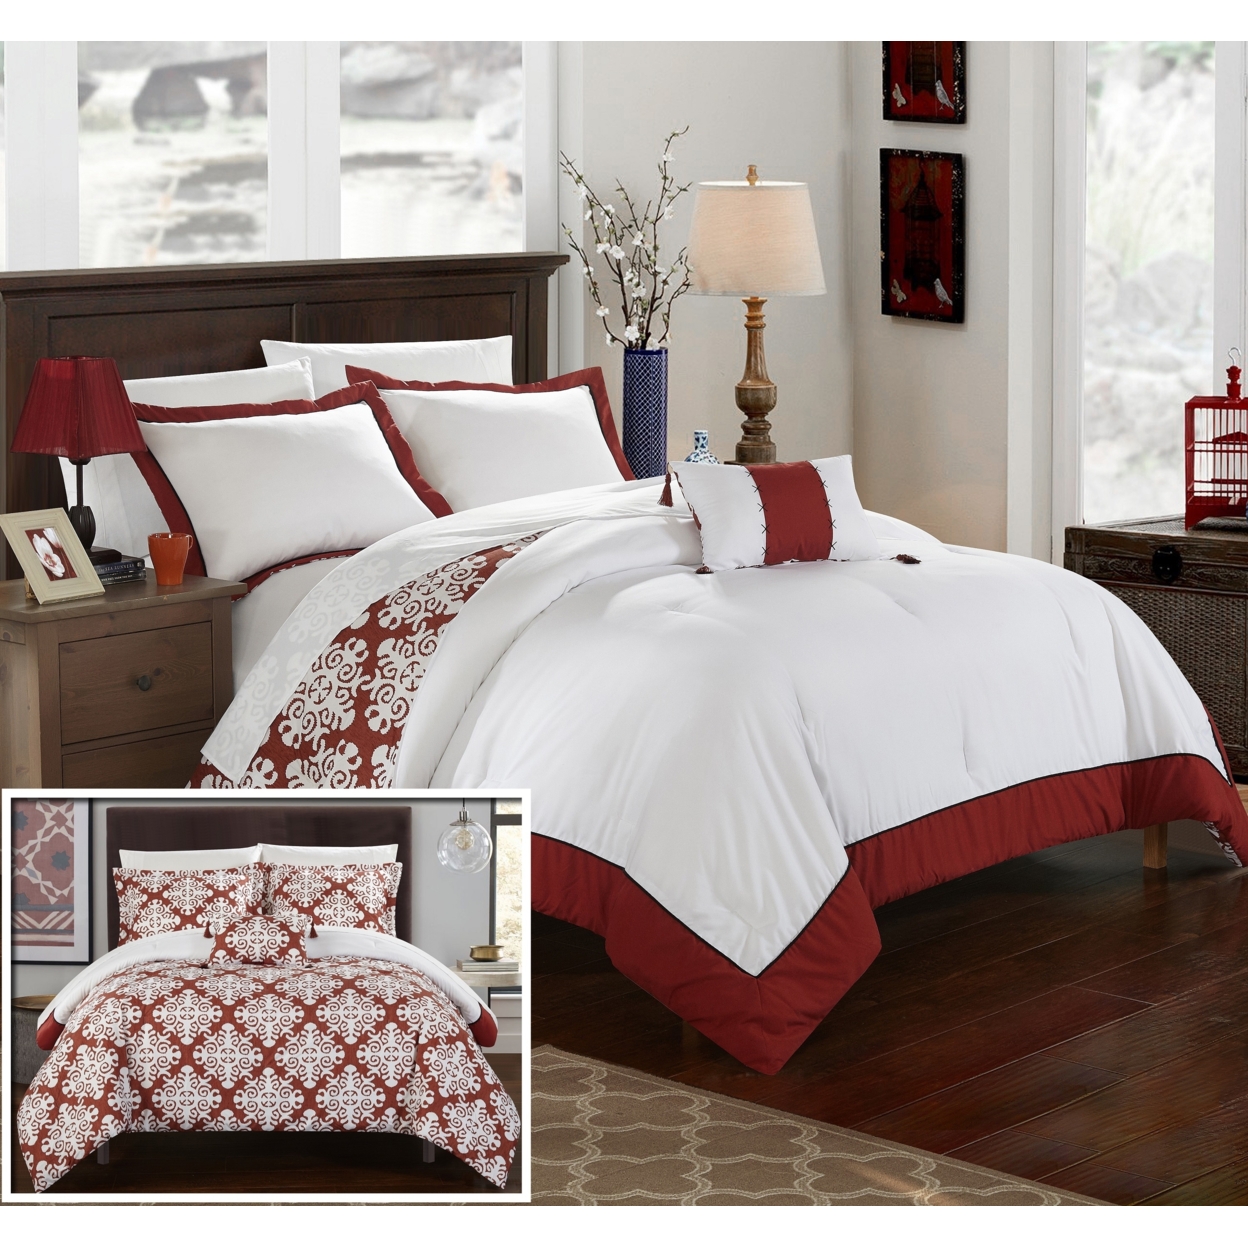 Chic Home 3/4 Piece Mallow Black And White REVERSIBLE Medallion Printed PLUSH Hotel Collection Duvet Cover Set - Marsala, Queen